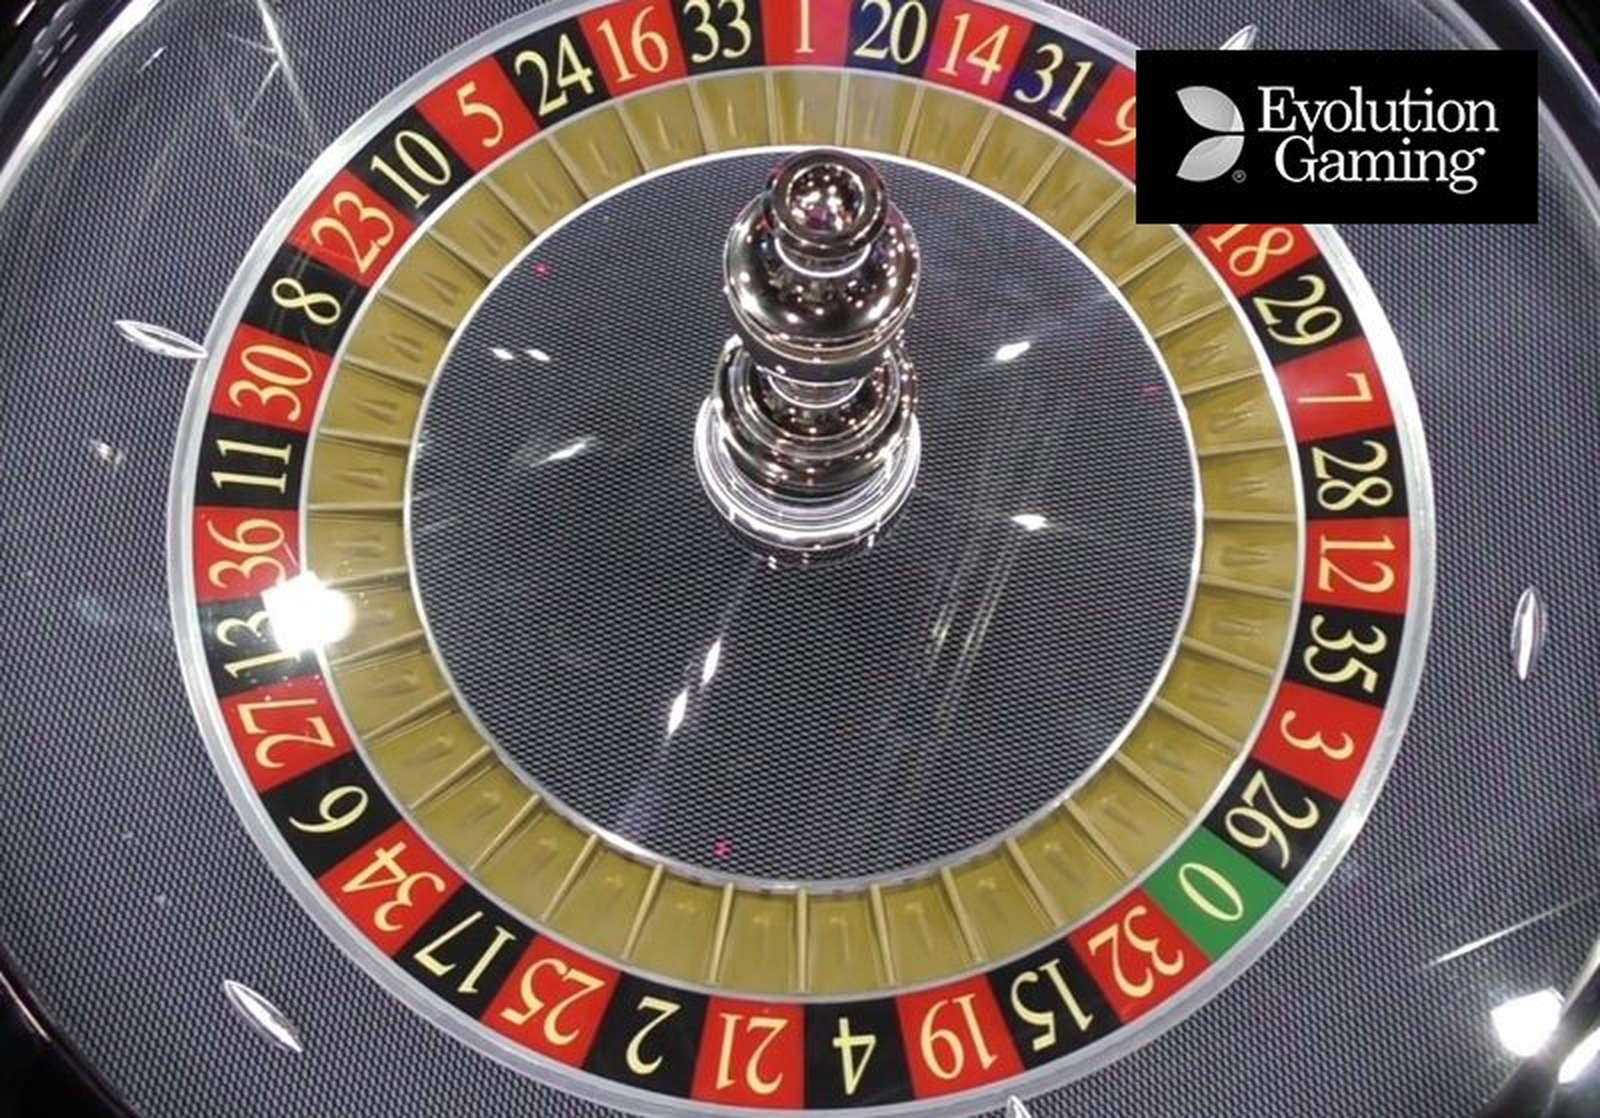 The Slingshot Roulette Live Online Slot Demo Game by Playtech